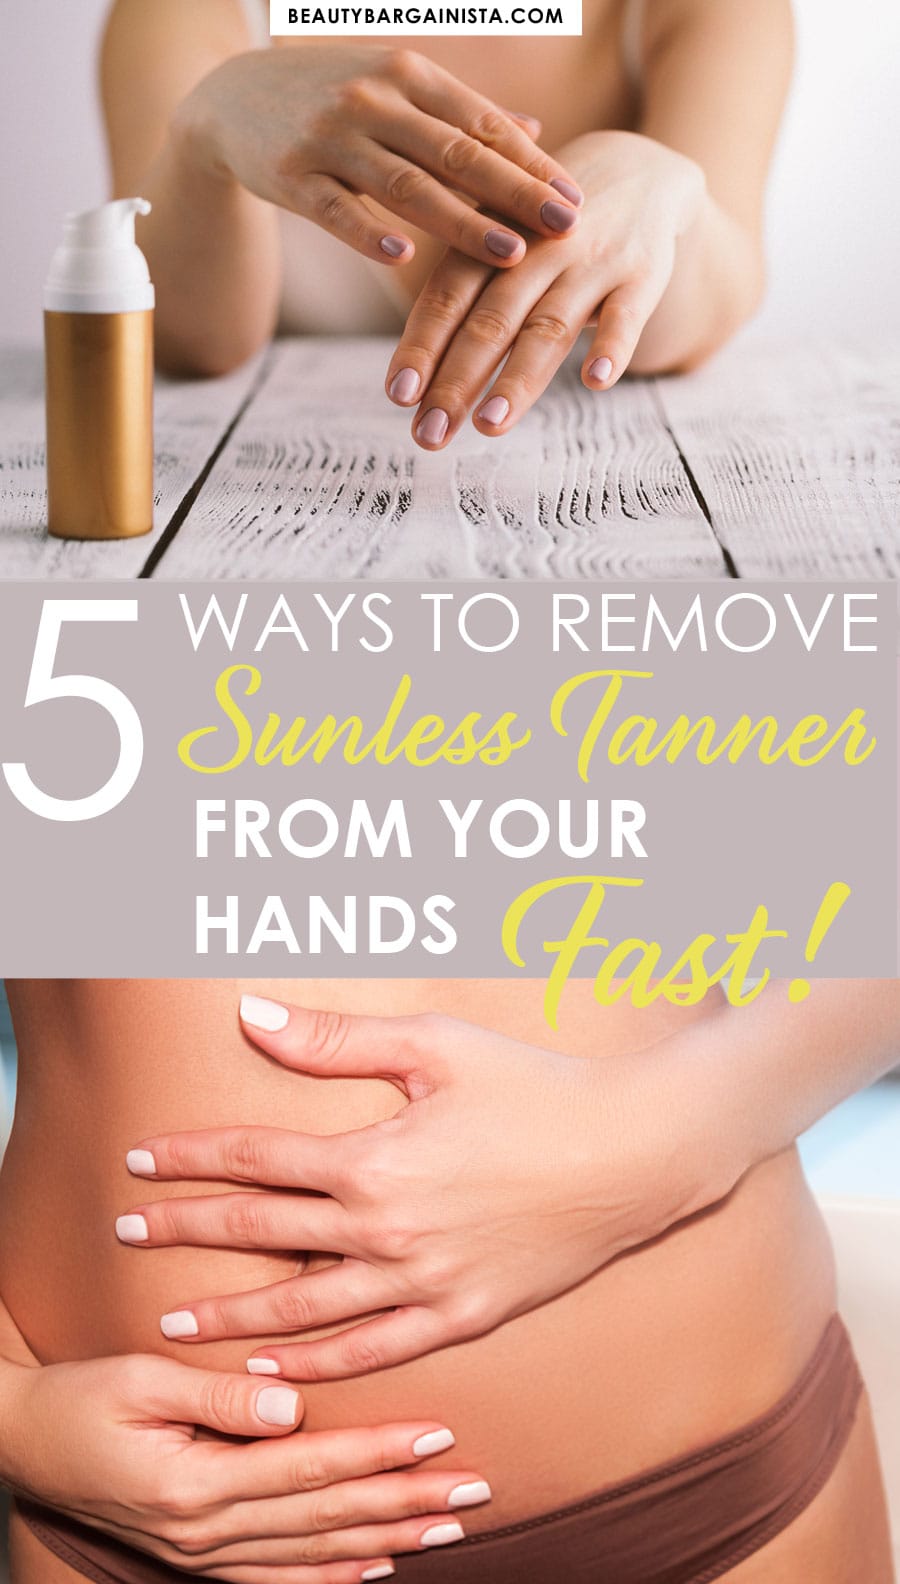 How to Remove Sunless Tanner from your hands in 30 minutes